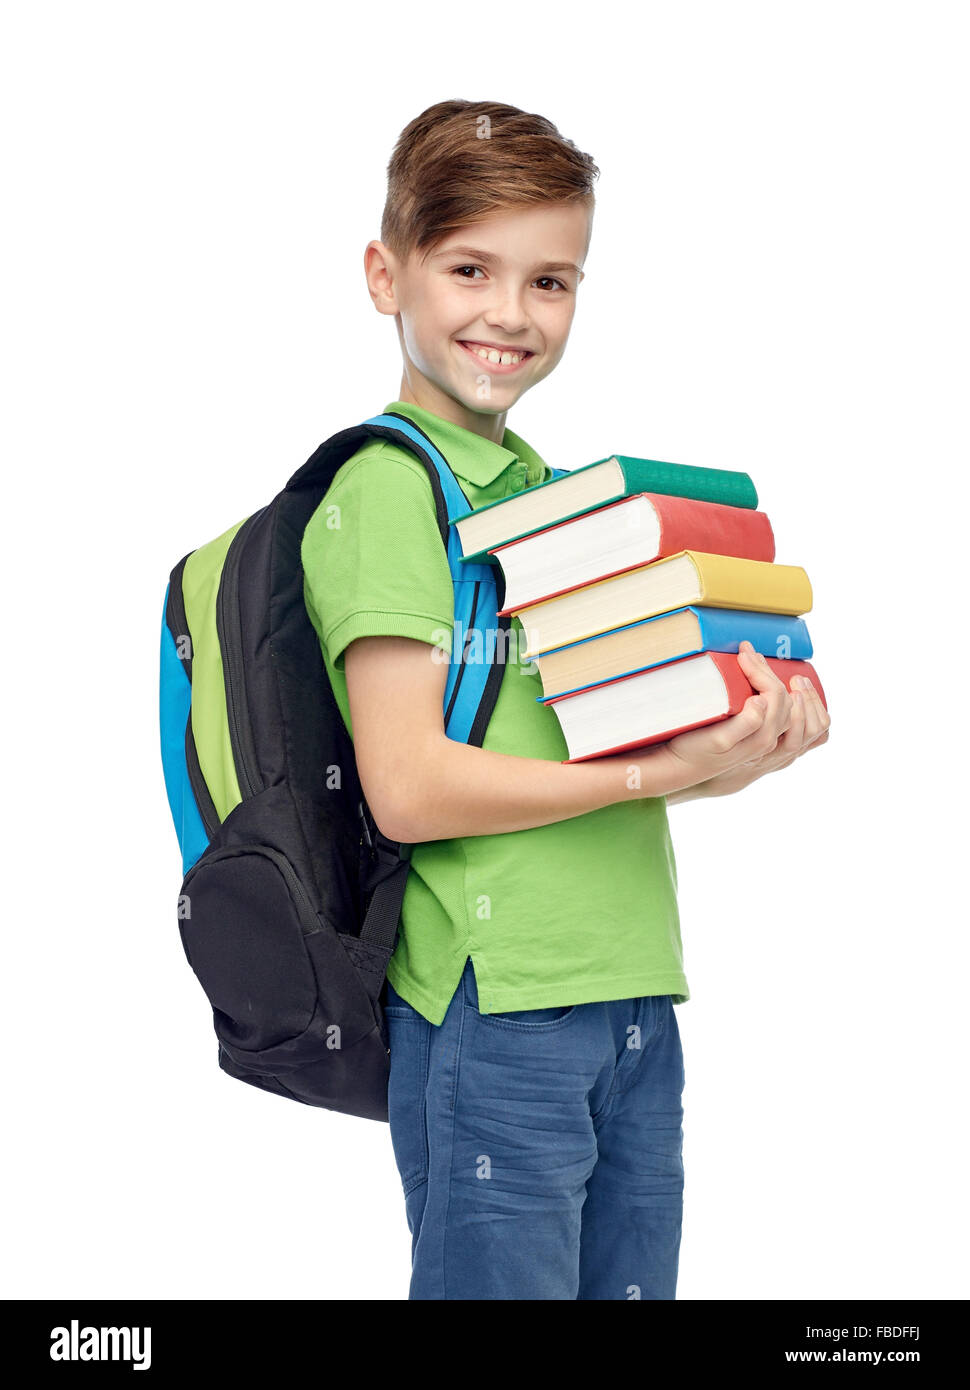 happy student boy with school bag and books Stock Photo - Alamy